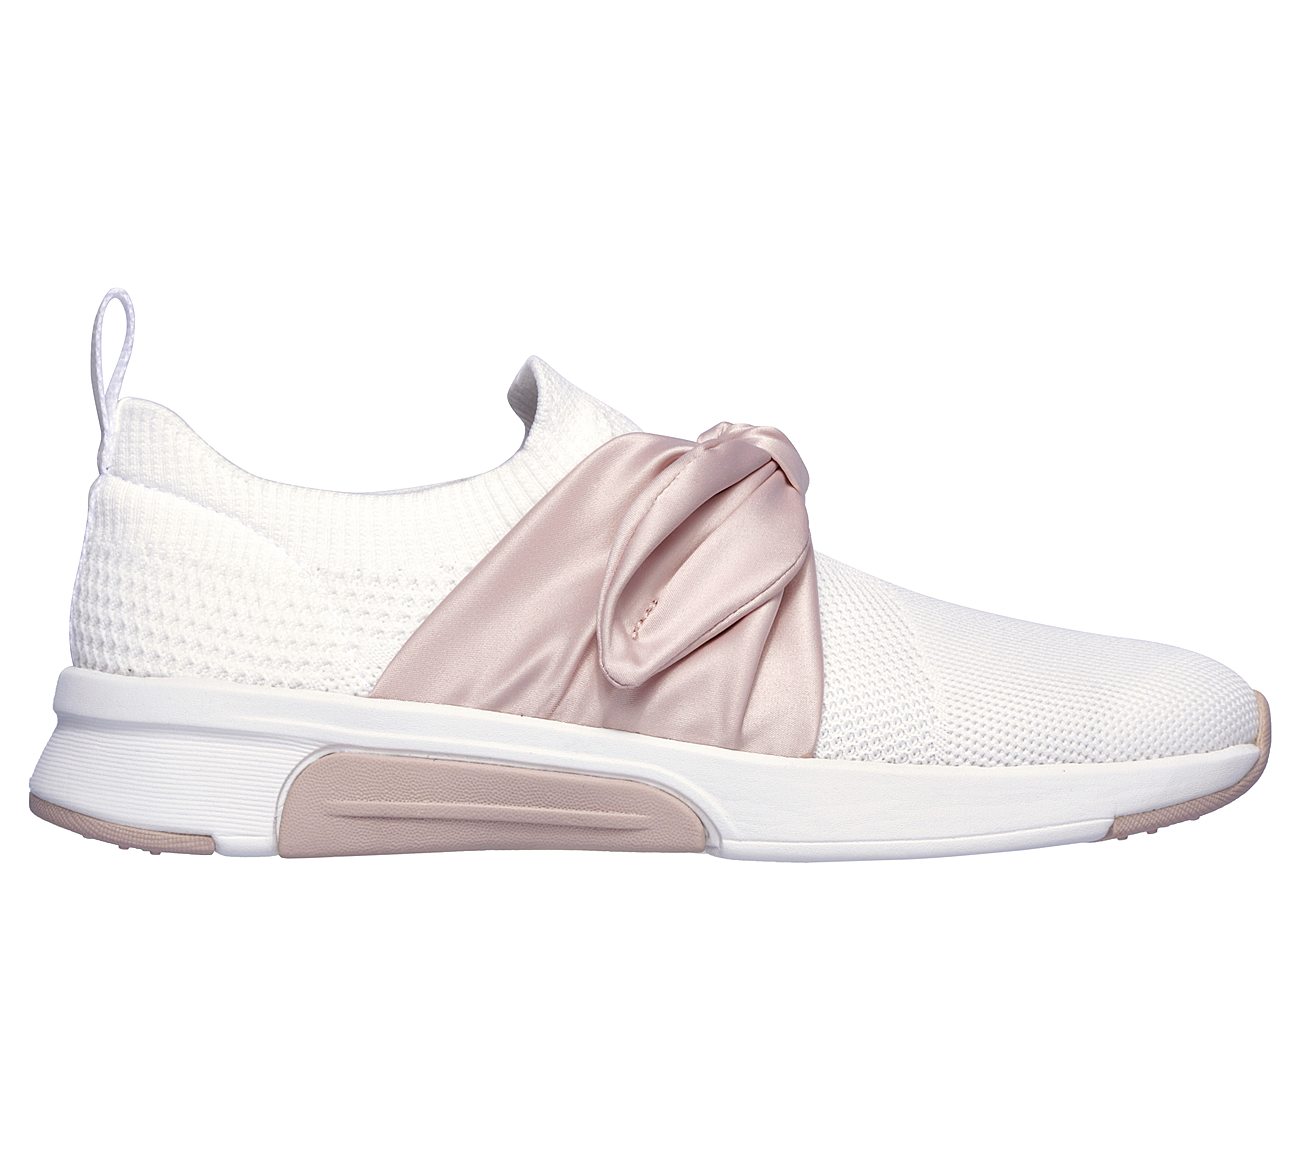 MODERN JOGGER - DEBBIE, WHITE/PINK Footwear Right View